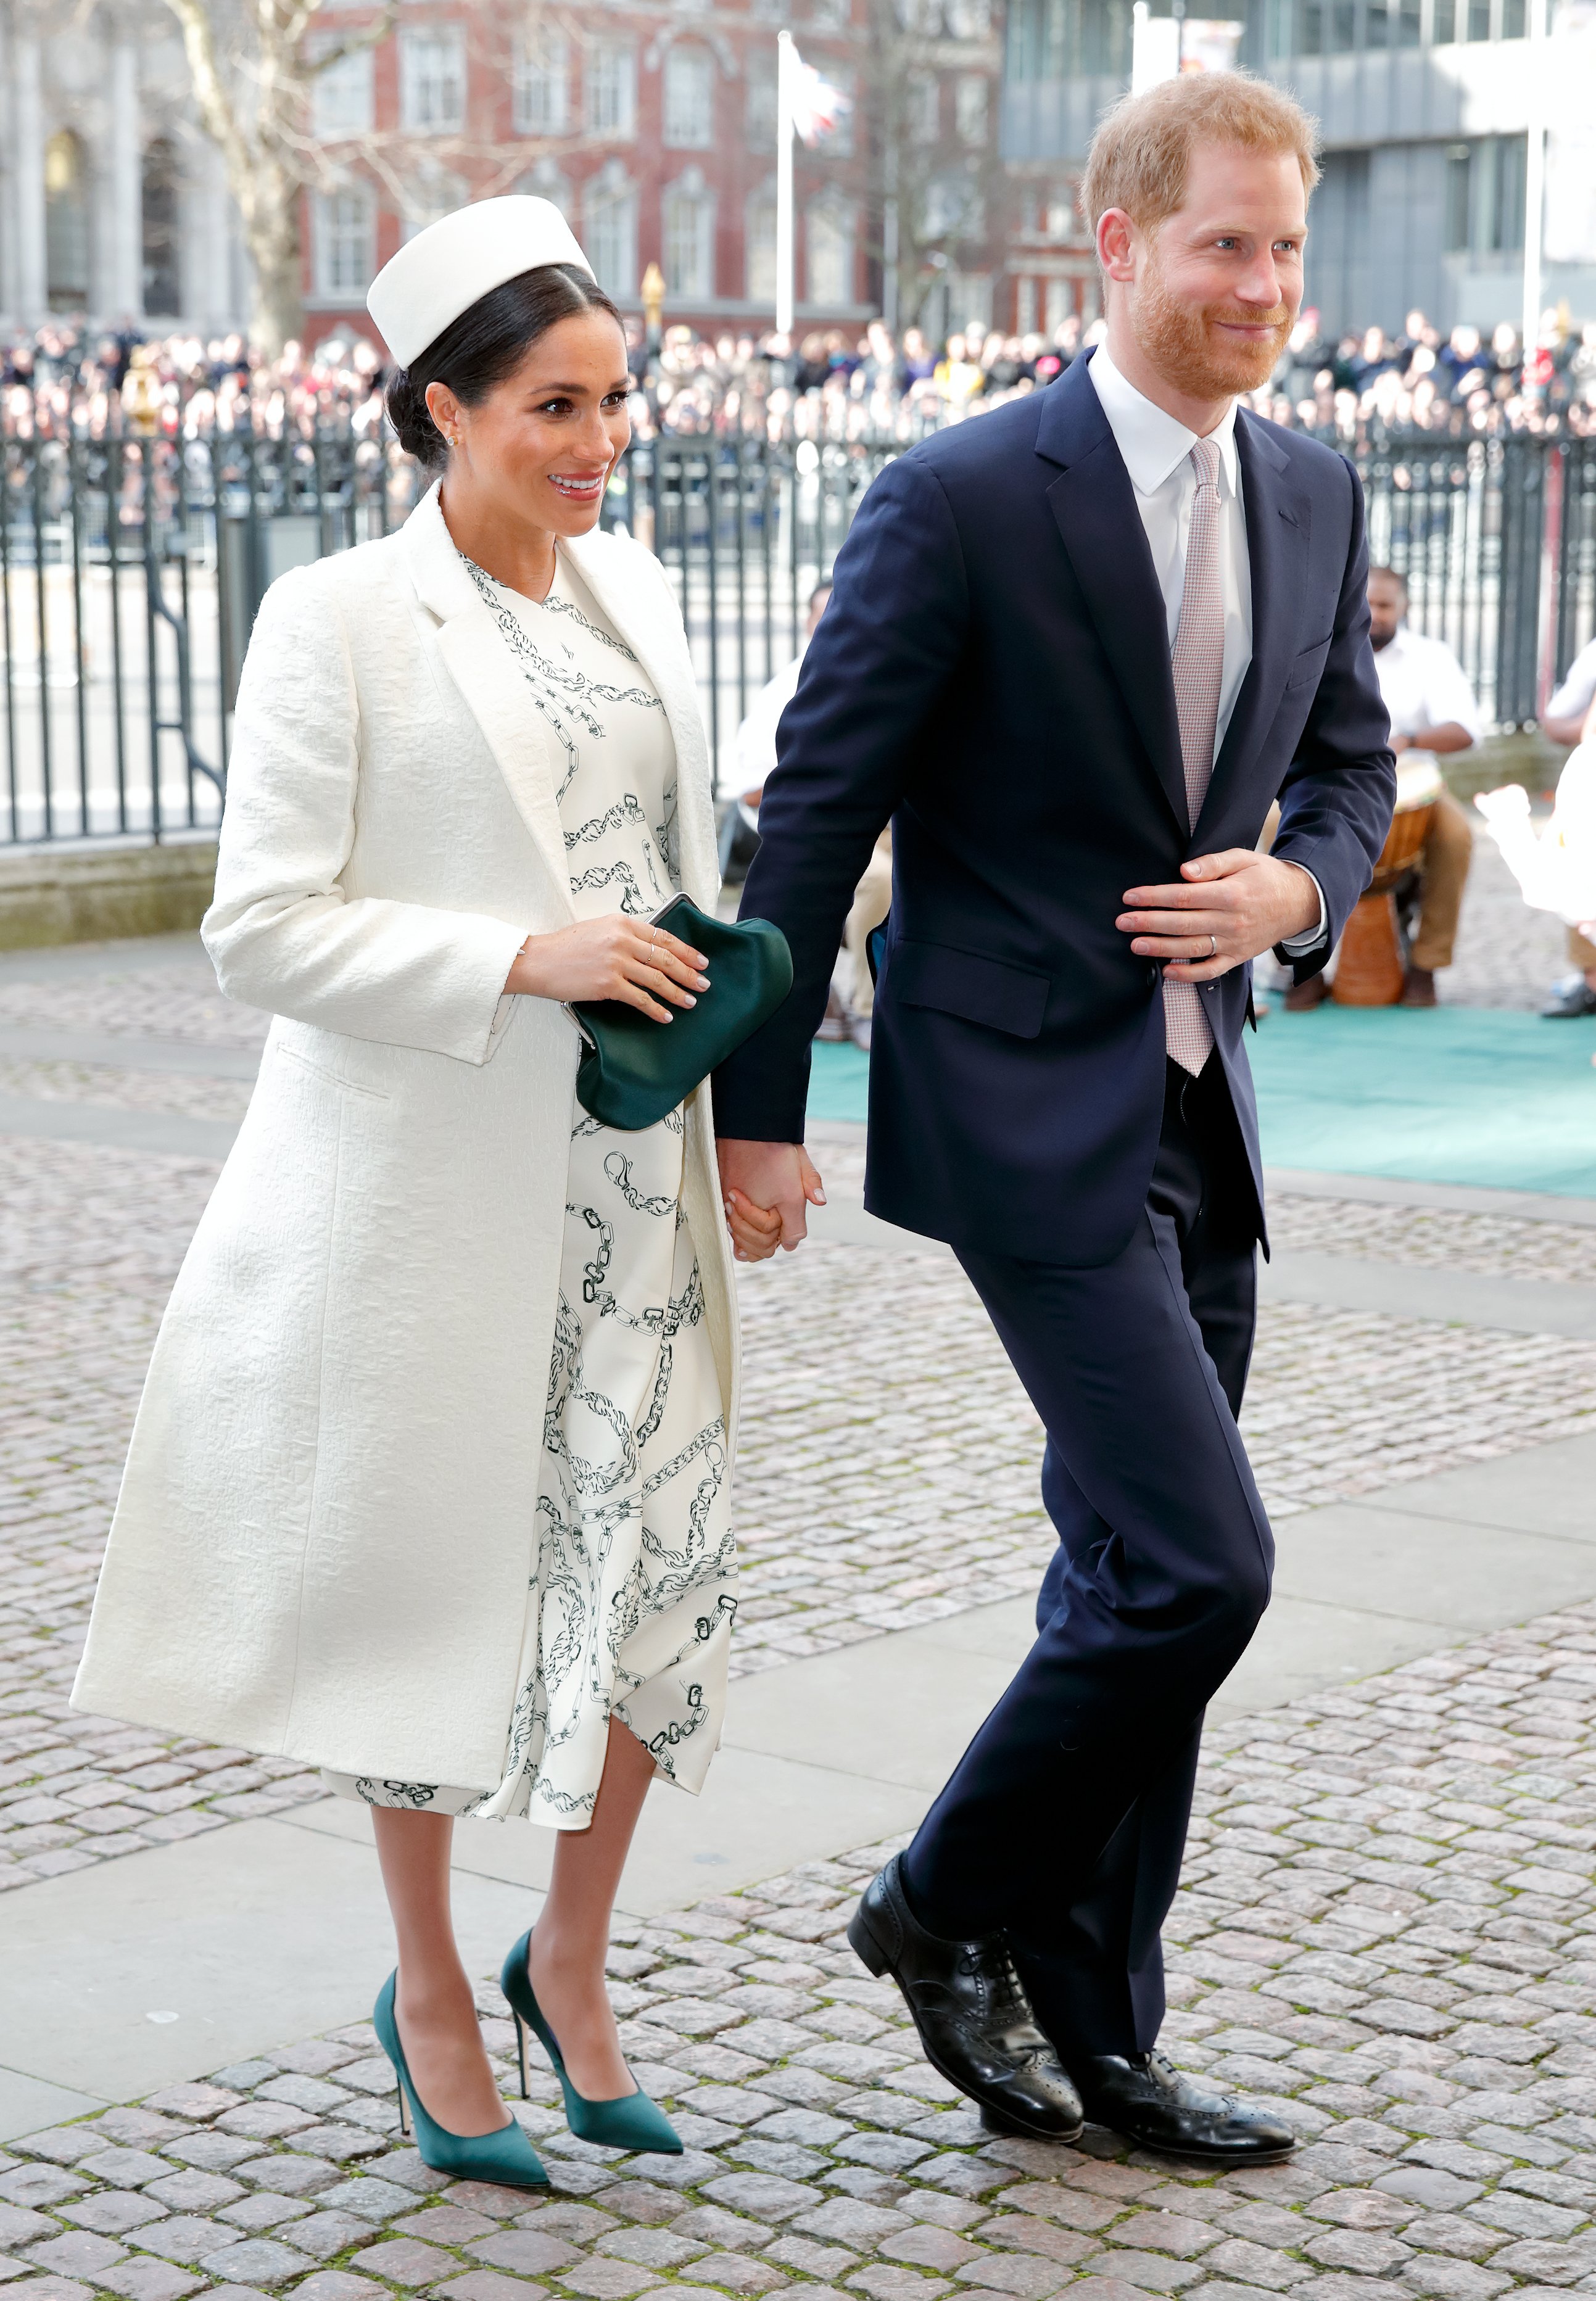 Meghan Markle and Prince Harry attend the 2019 Commonwealth Day service at Westminster Abbey on March 11, 2019 in London, England | Source: Getty Images